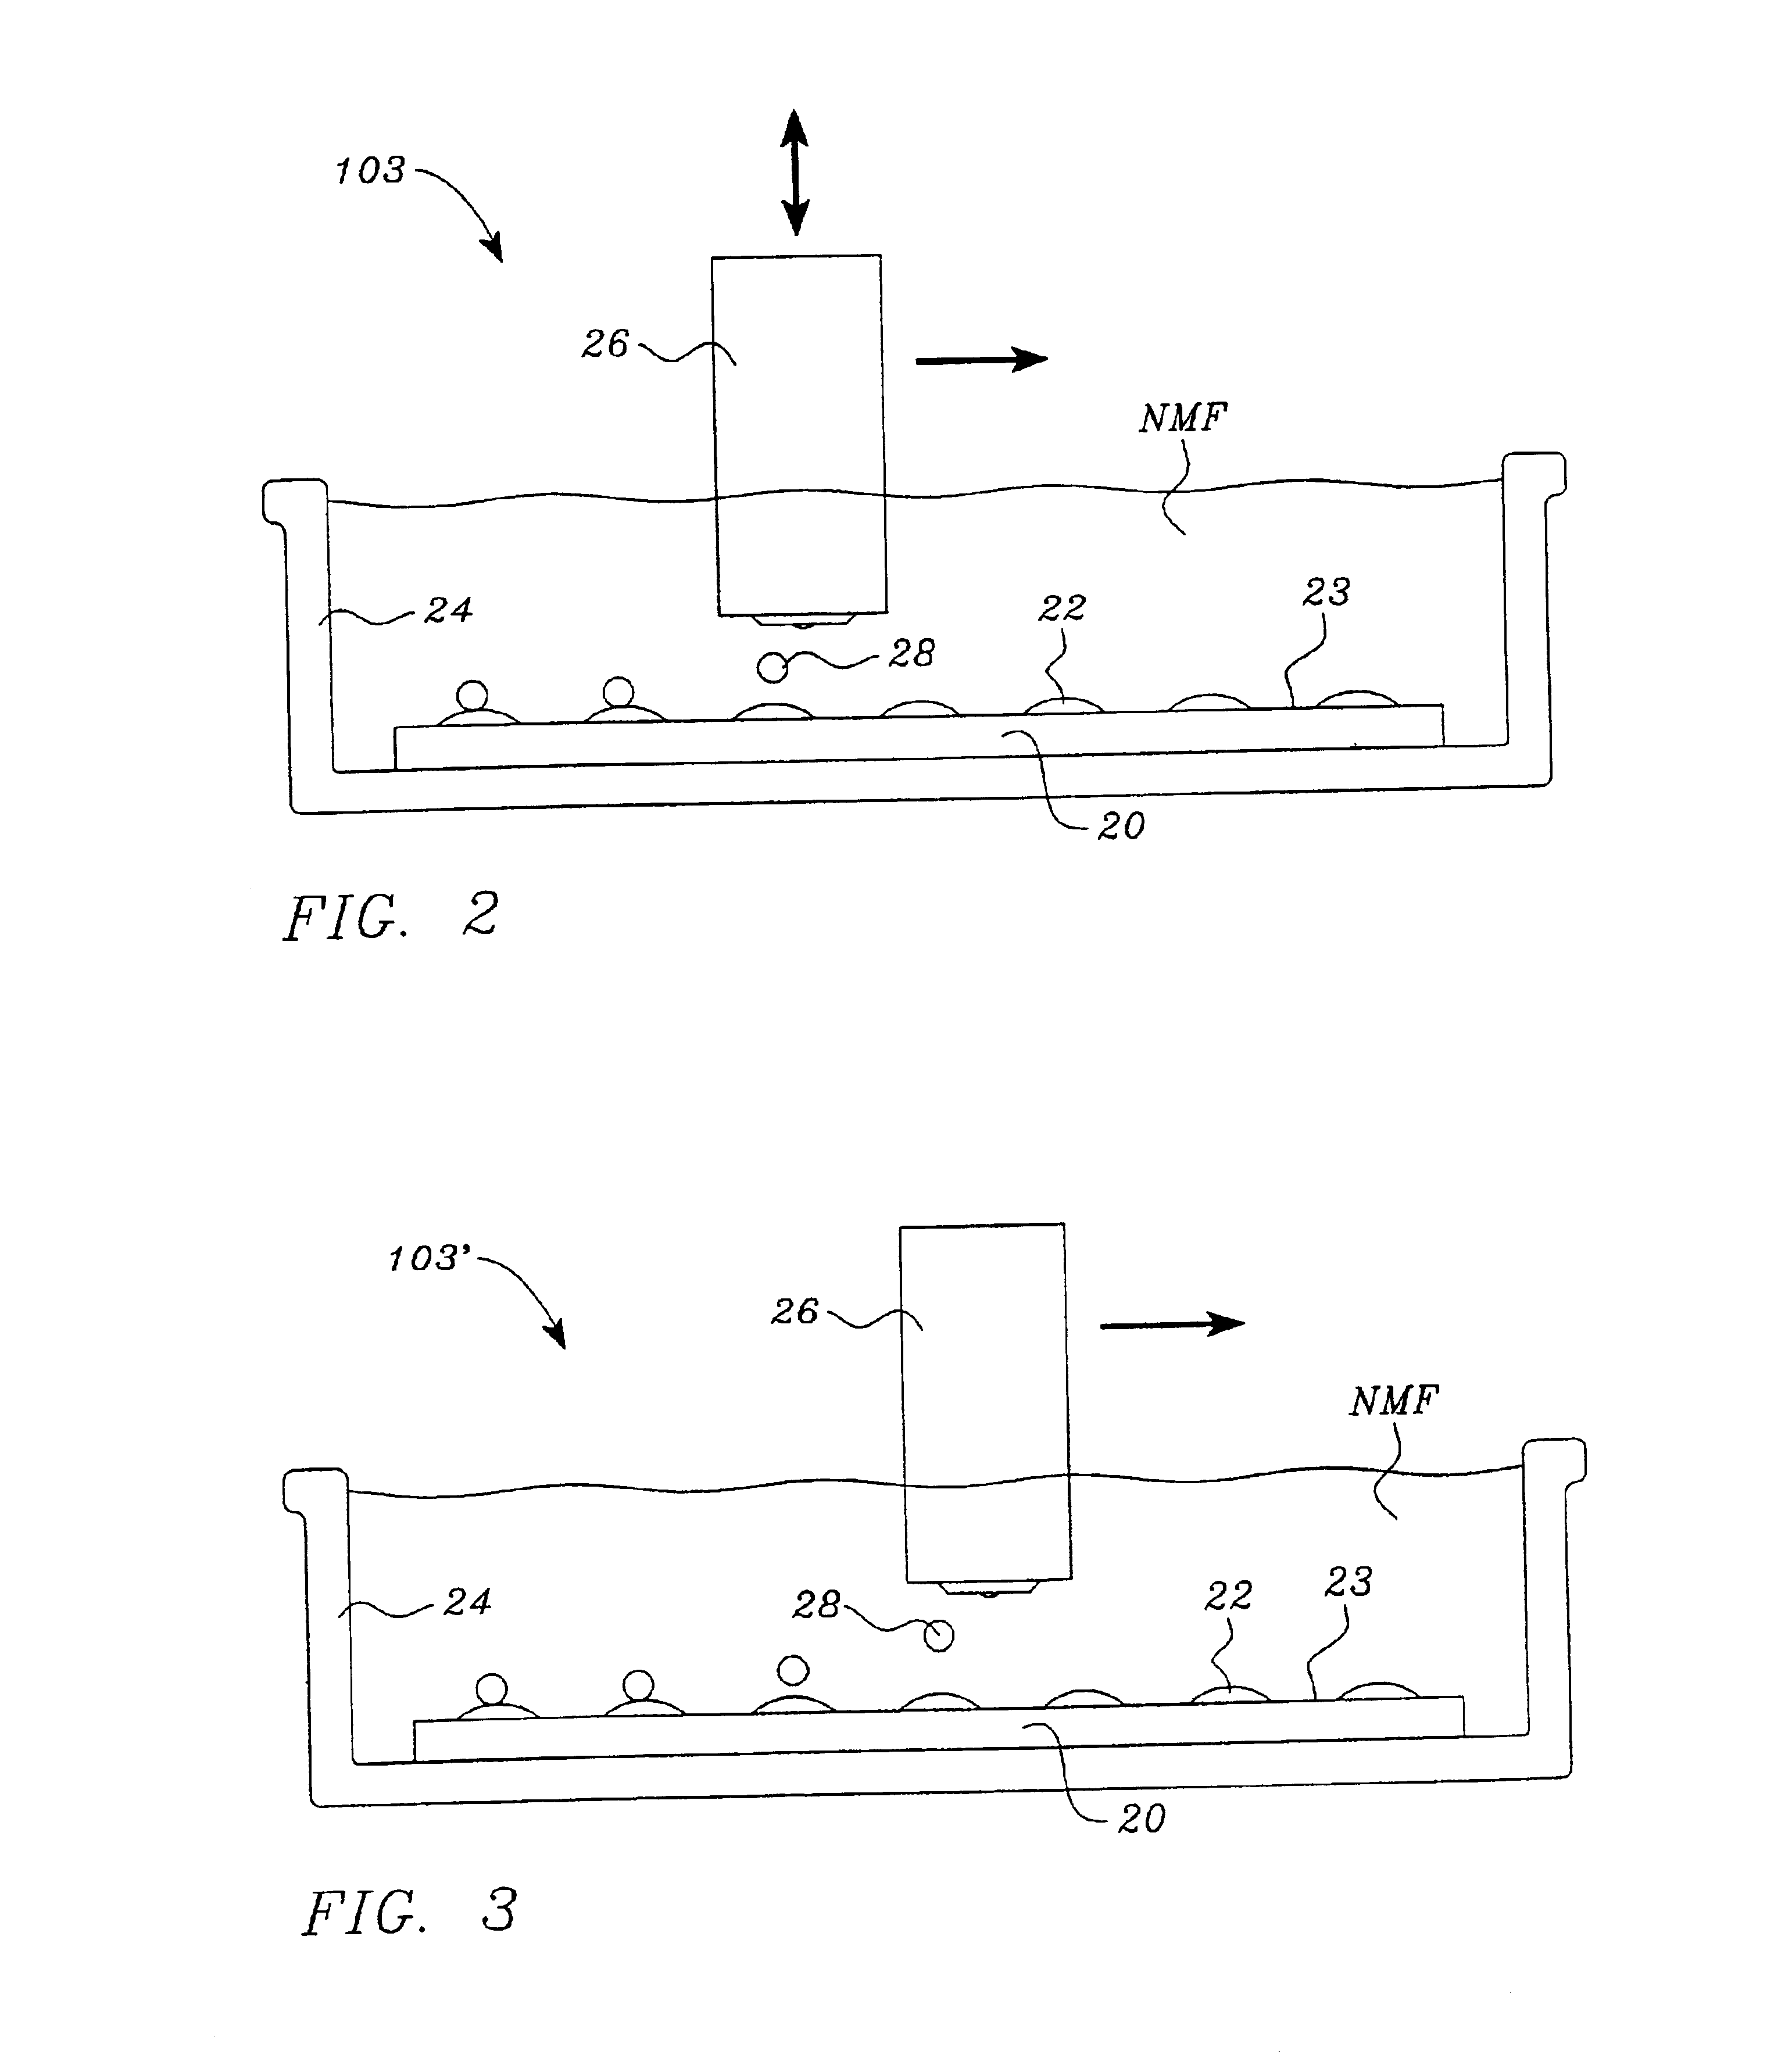 Method of shielding biosynthesis reactions from the ambient environment on an array